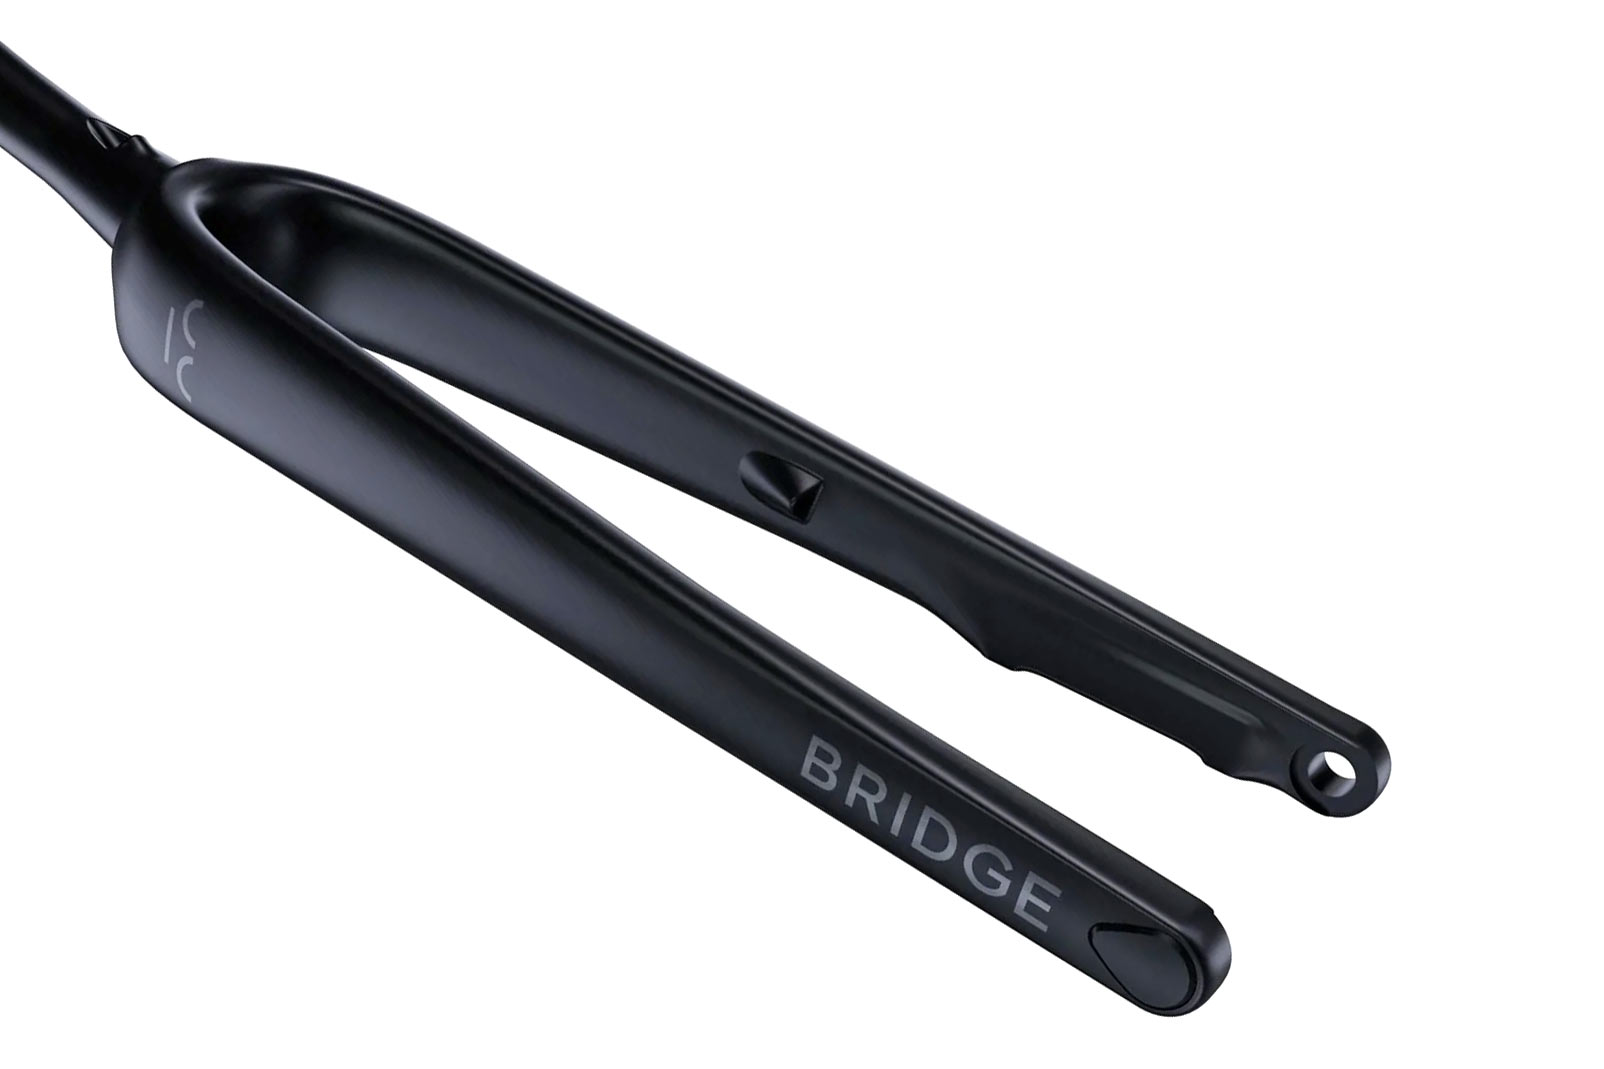 Bridge Bike Works All-Road Integrated Fork, made-in-Canada carbon fork now available